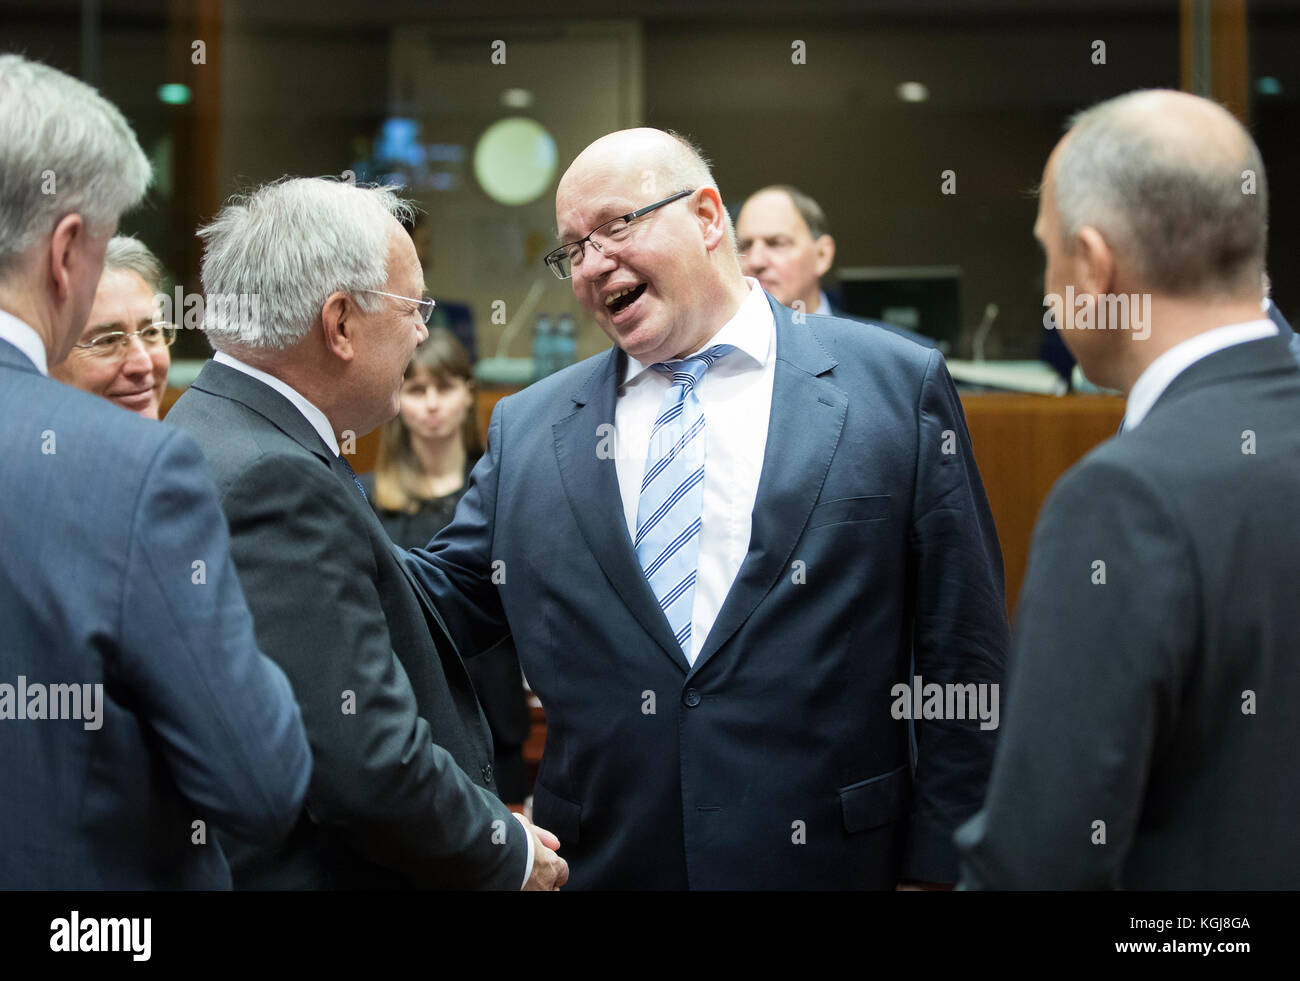 Brussels, Belgium, November 7, 2017: Swiss federal councillor Johann Schneider-Ammann (L) is talking with the German Chief of Staff and acting finance minister Peter Altmaier (R) during the European Finance Ministers meeting.- NO WIRE SERVICE - Photo: Thierry Monasse/dpa - NO WIRE SERVICE - Photo: Thierry Monasse/dpa Stock Photo